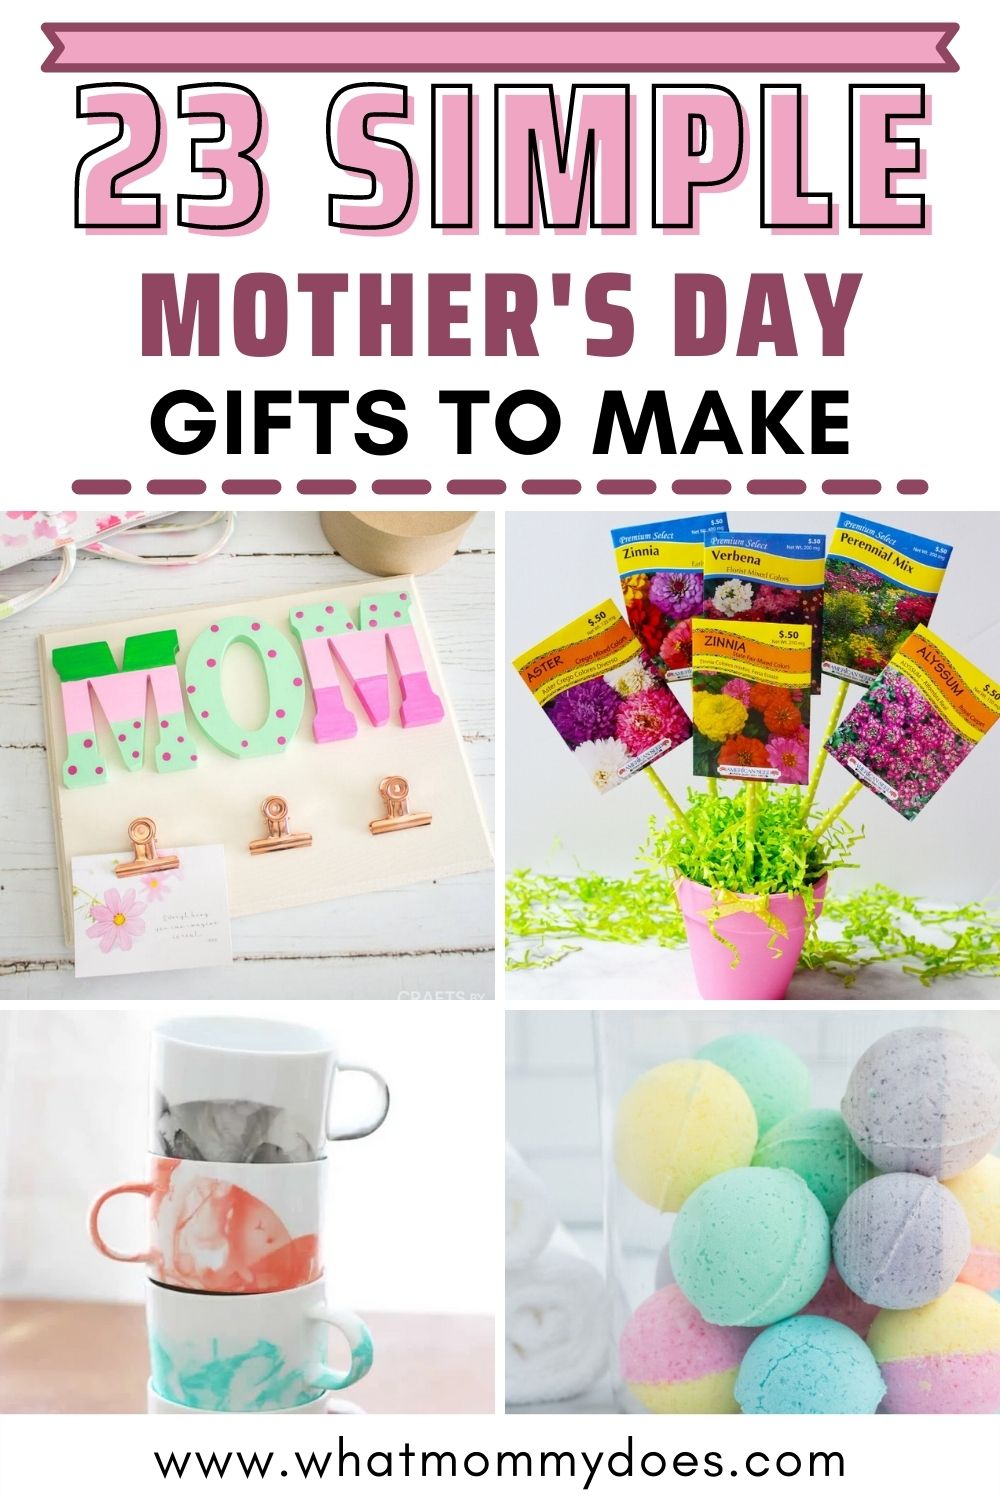 https://www.whatmommydoes.com/wp-content/uploads/2022/03/simple-mothers-day-gift-ideas.jpg